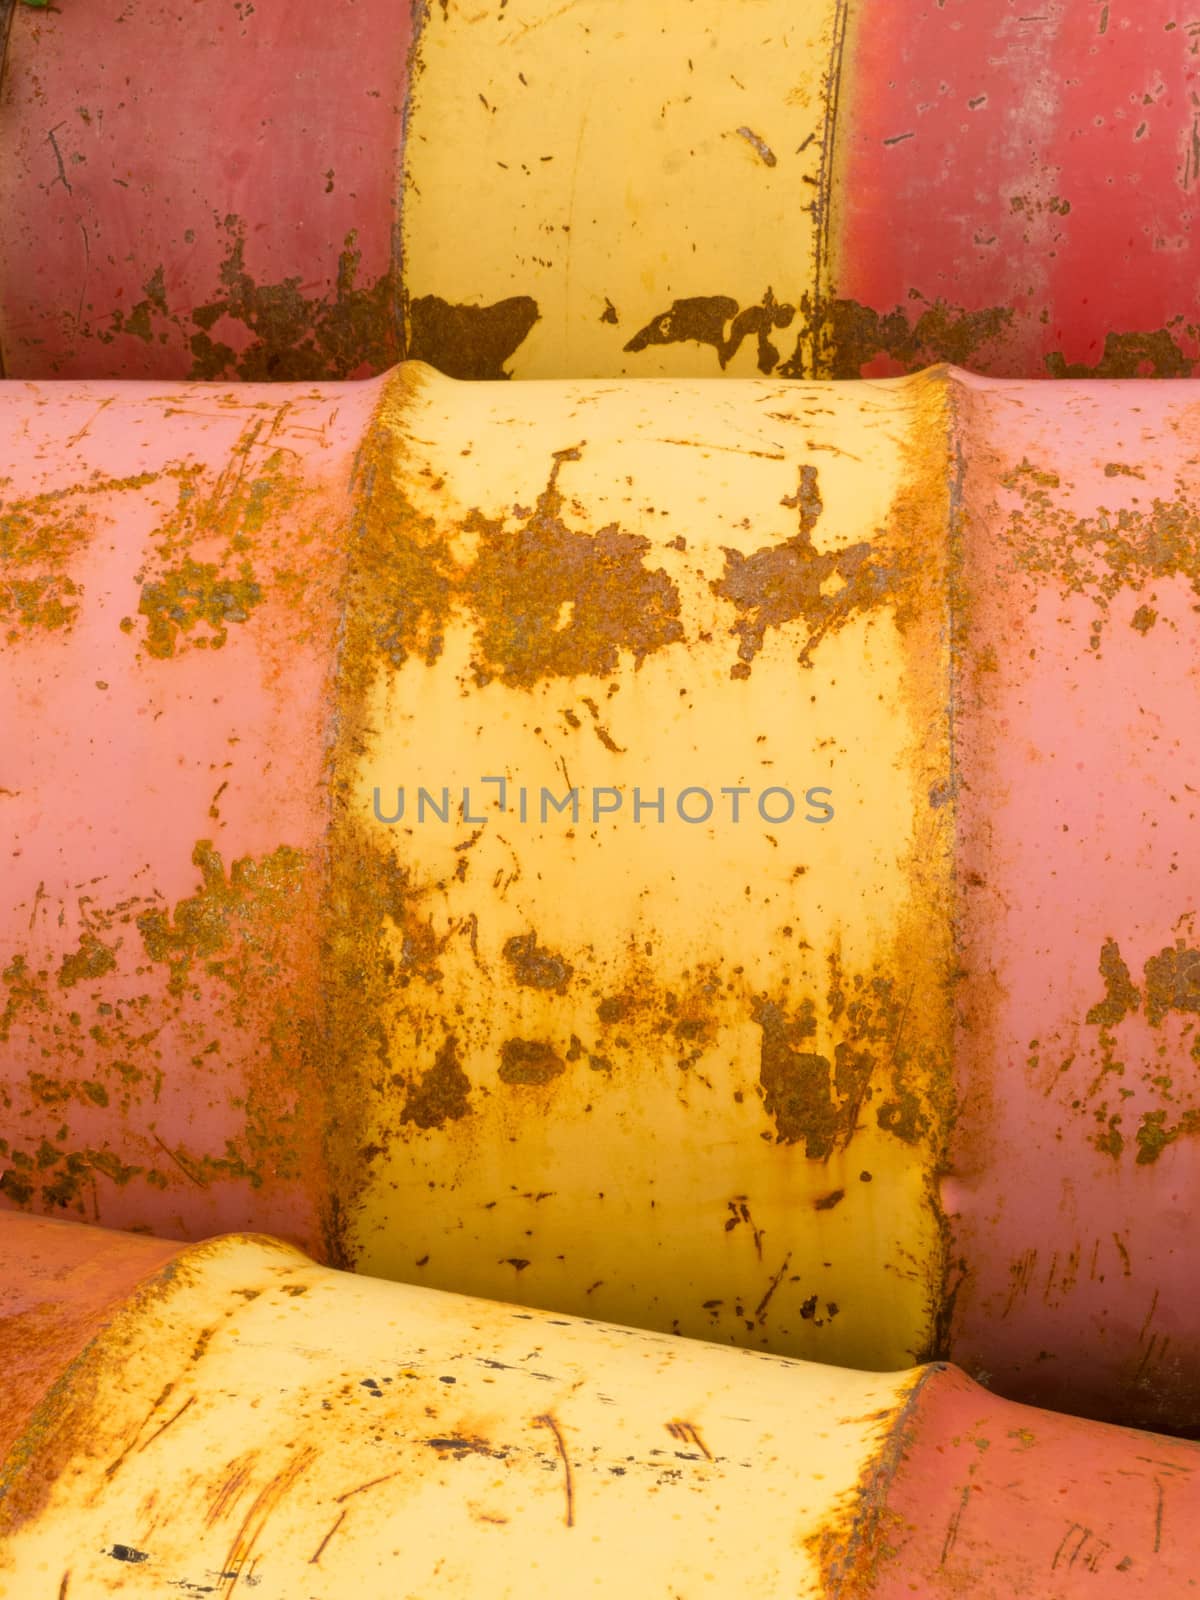 Rusty oil barrels yellow red background pattern by PiLens